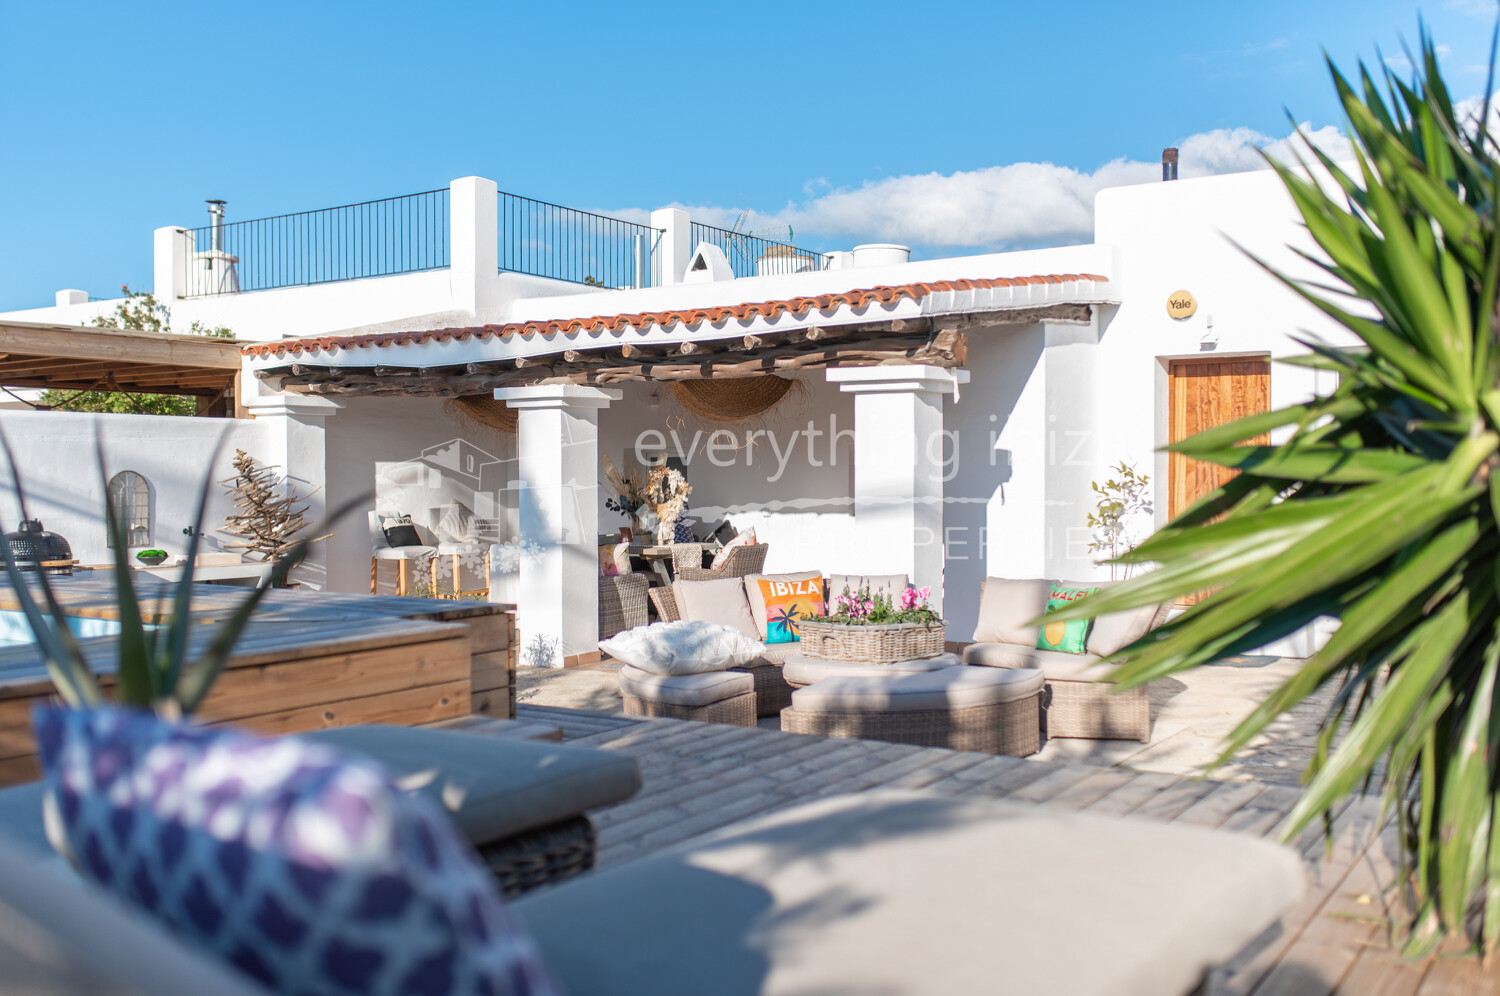 Charming Stylish Home with Pool & Abundant Exterior Space, ref. 1543, for sale in Ibiza by everything ibiza Properties